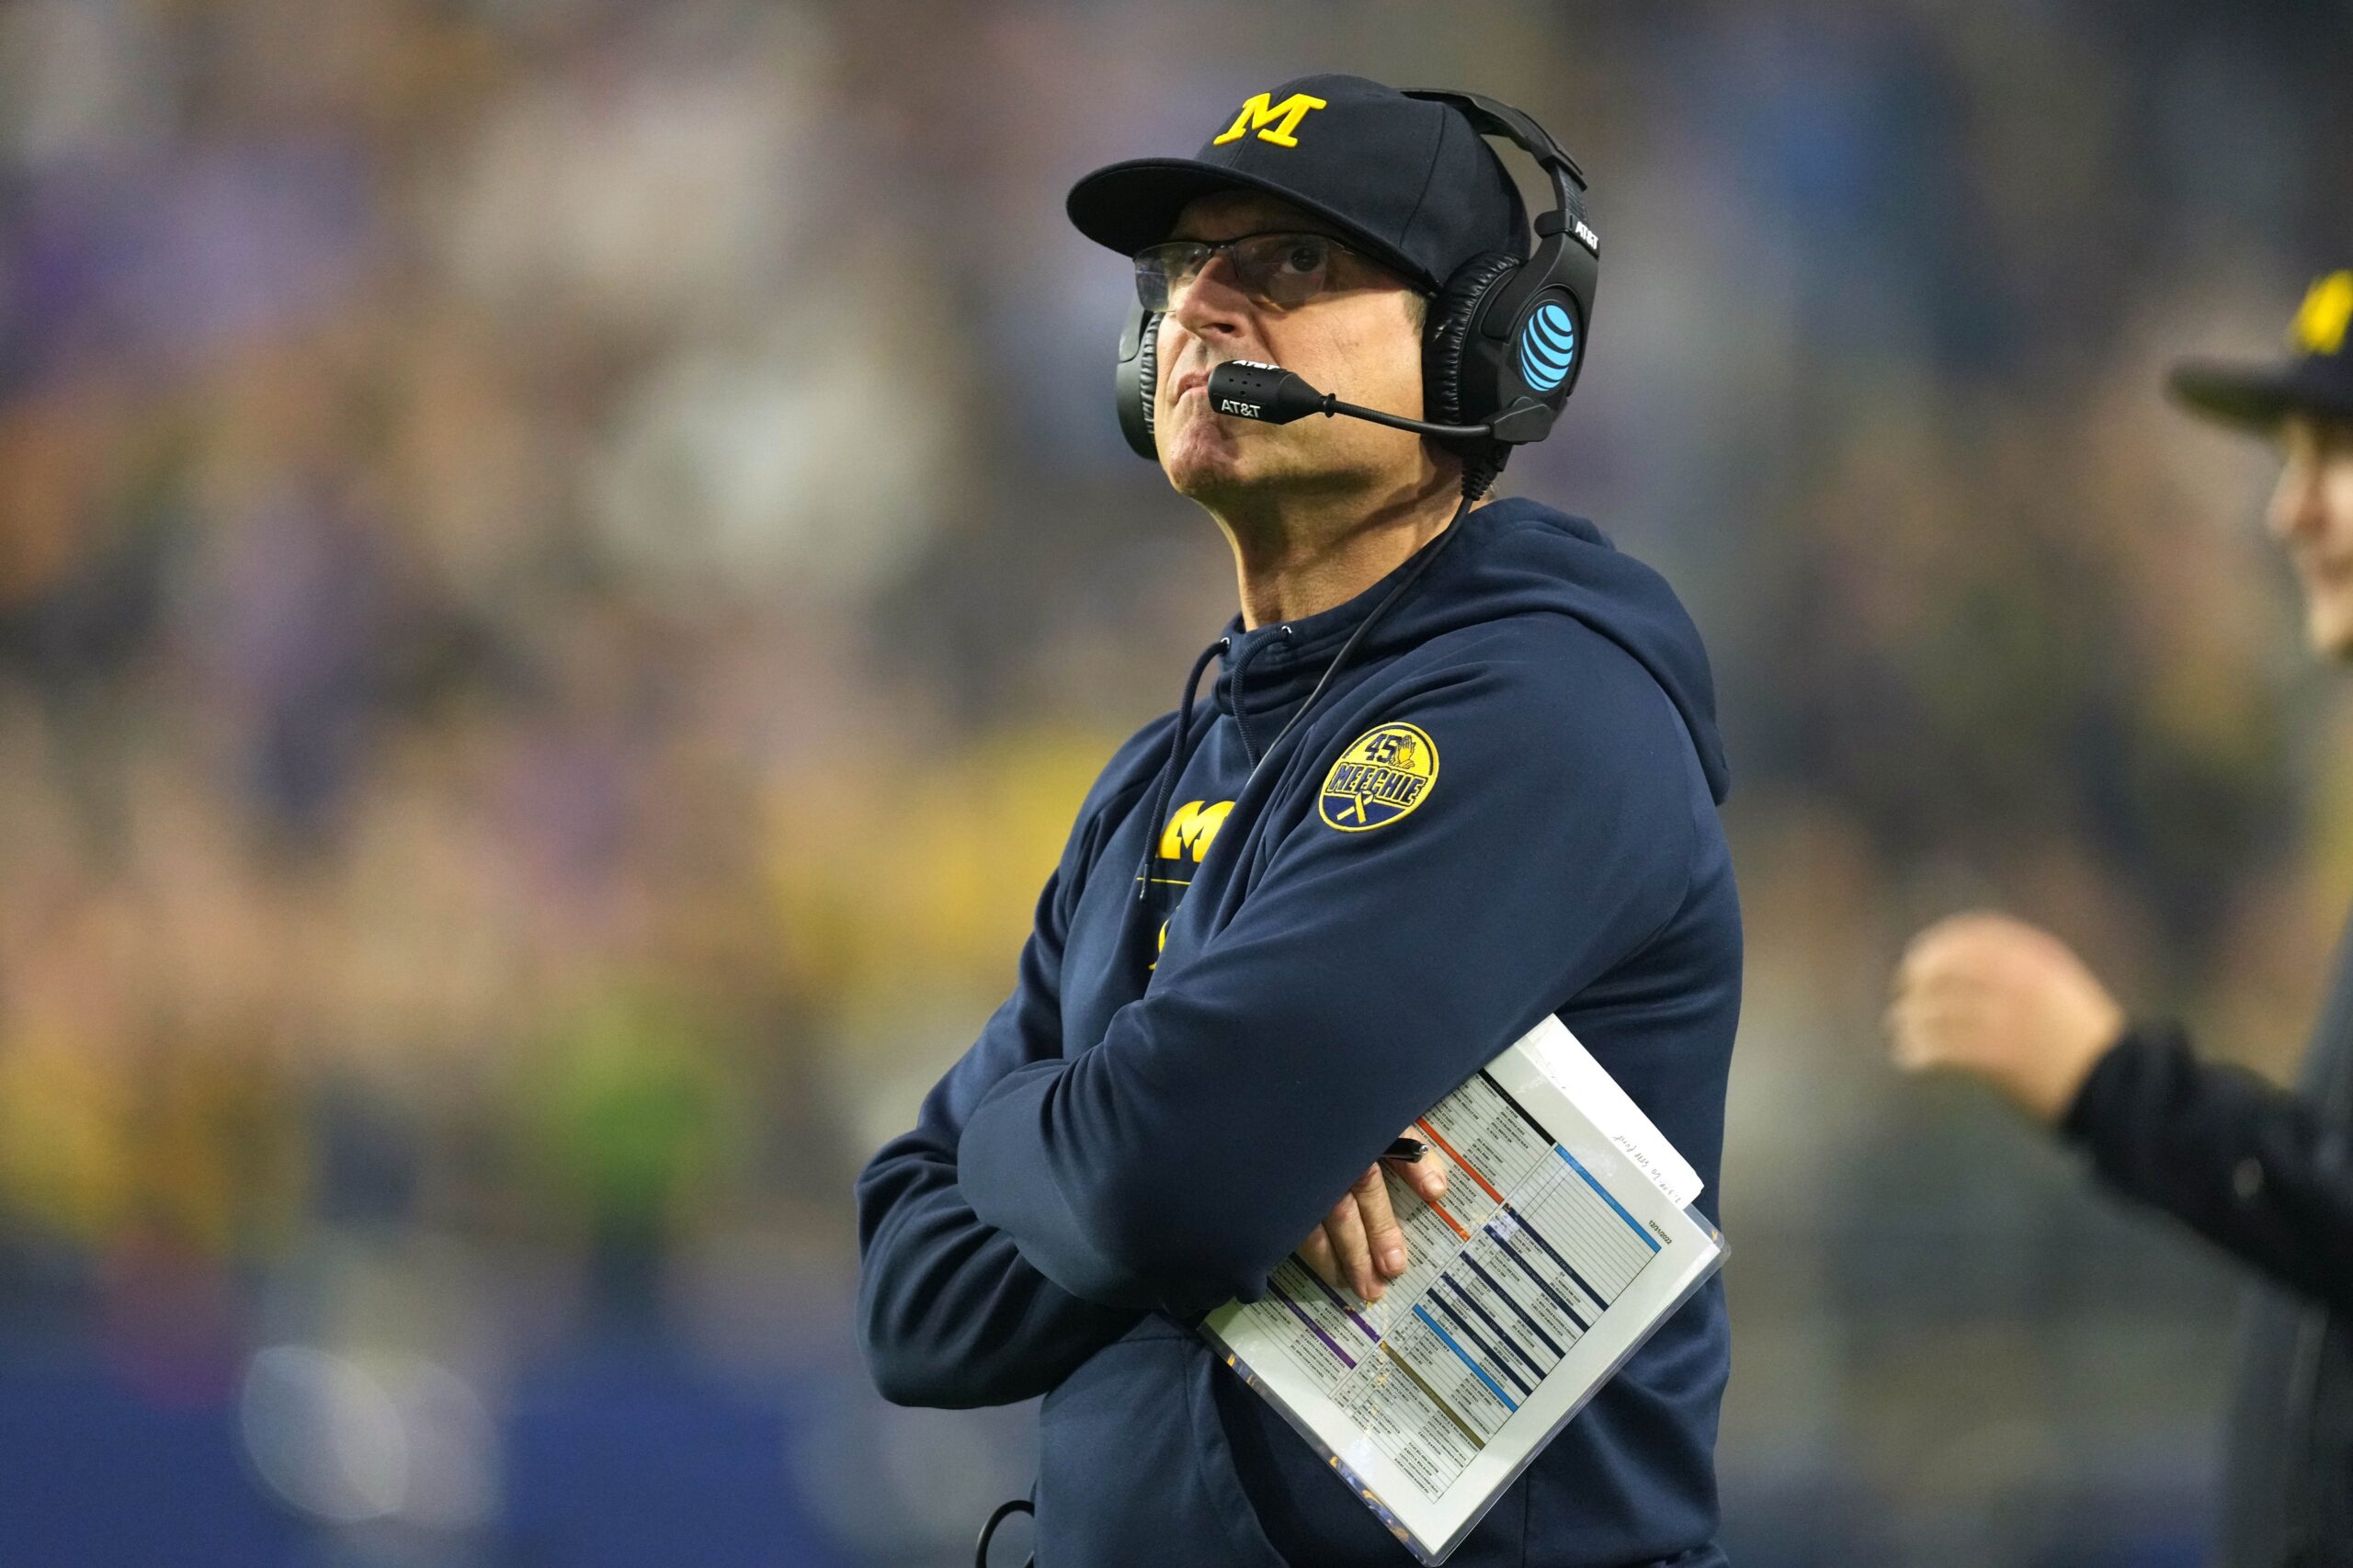 Jim Harbaugh Is a Good but Potentially Explosive NFL Coaching